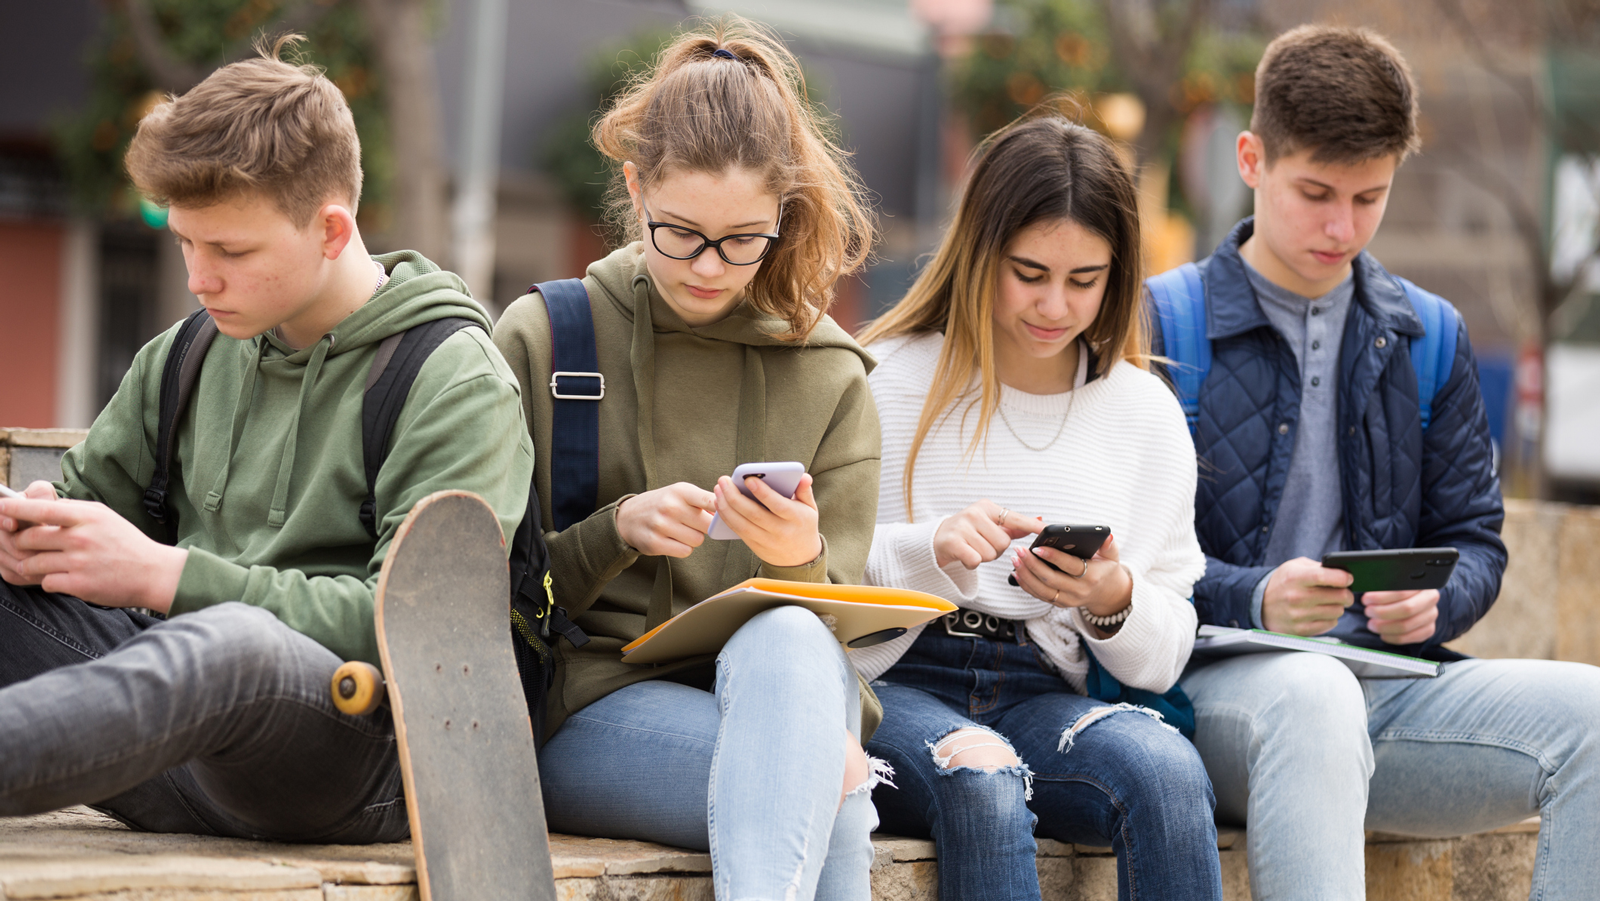 Group of 17 secondary schools in London collectively decide to ban smartphones